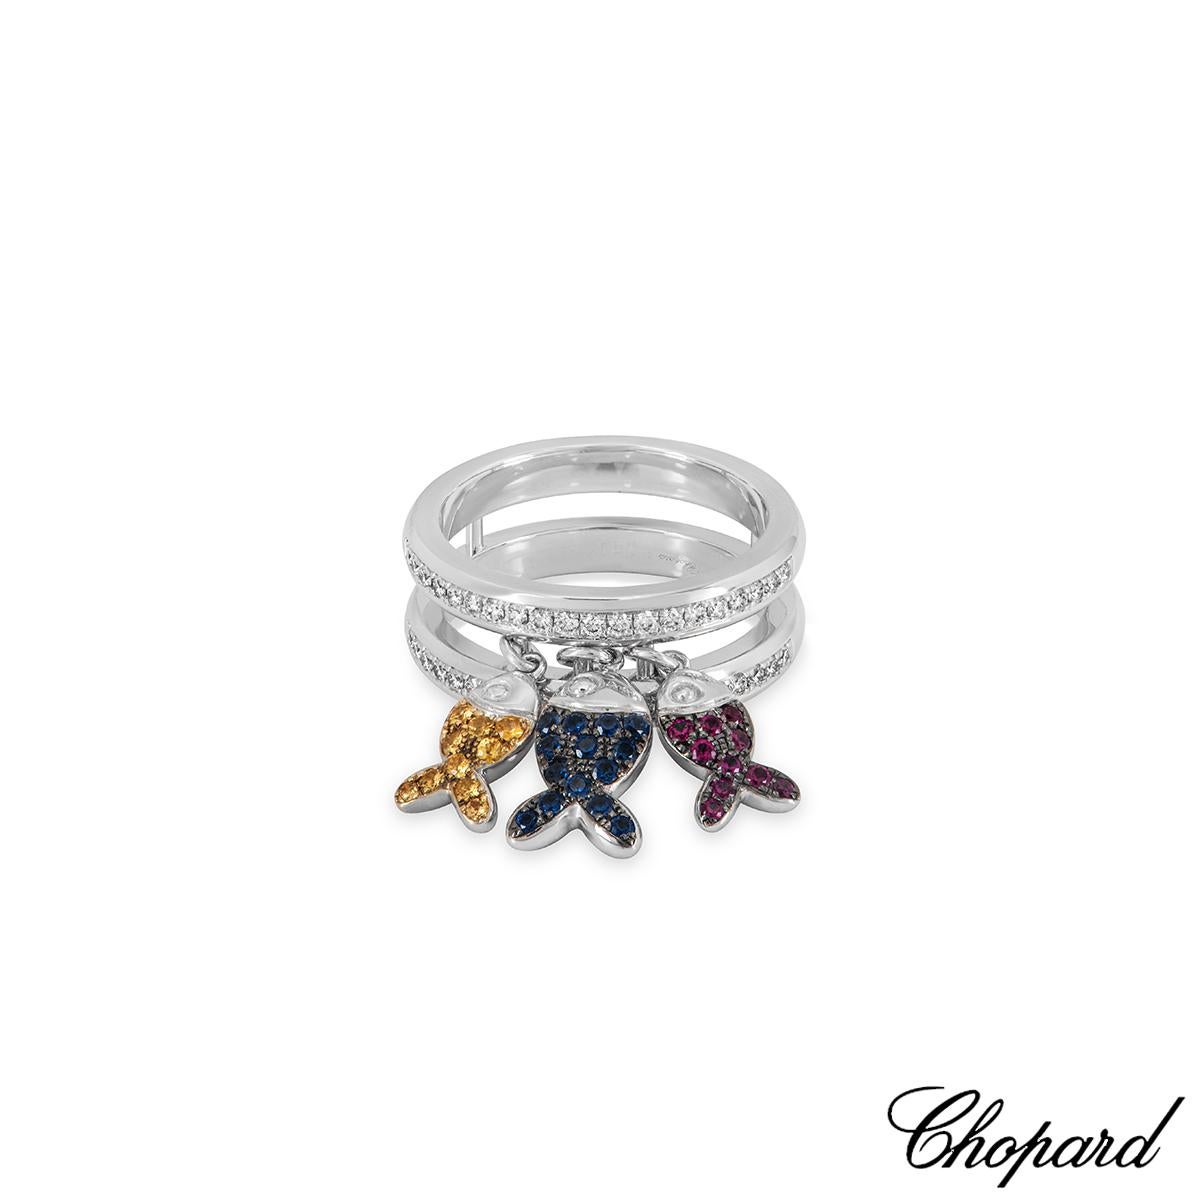 Round Cut Chopard White Gold Diamond, Ruby & Sapphire Fish Ring 82/4702-1002 For Sale